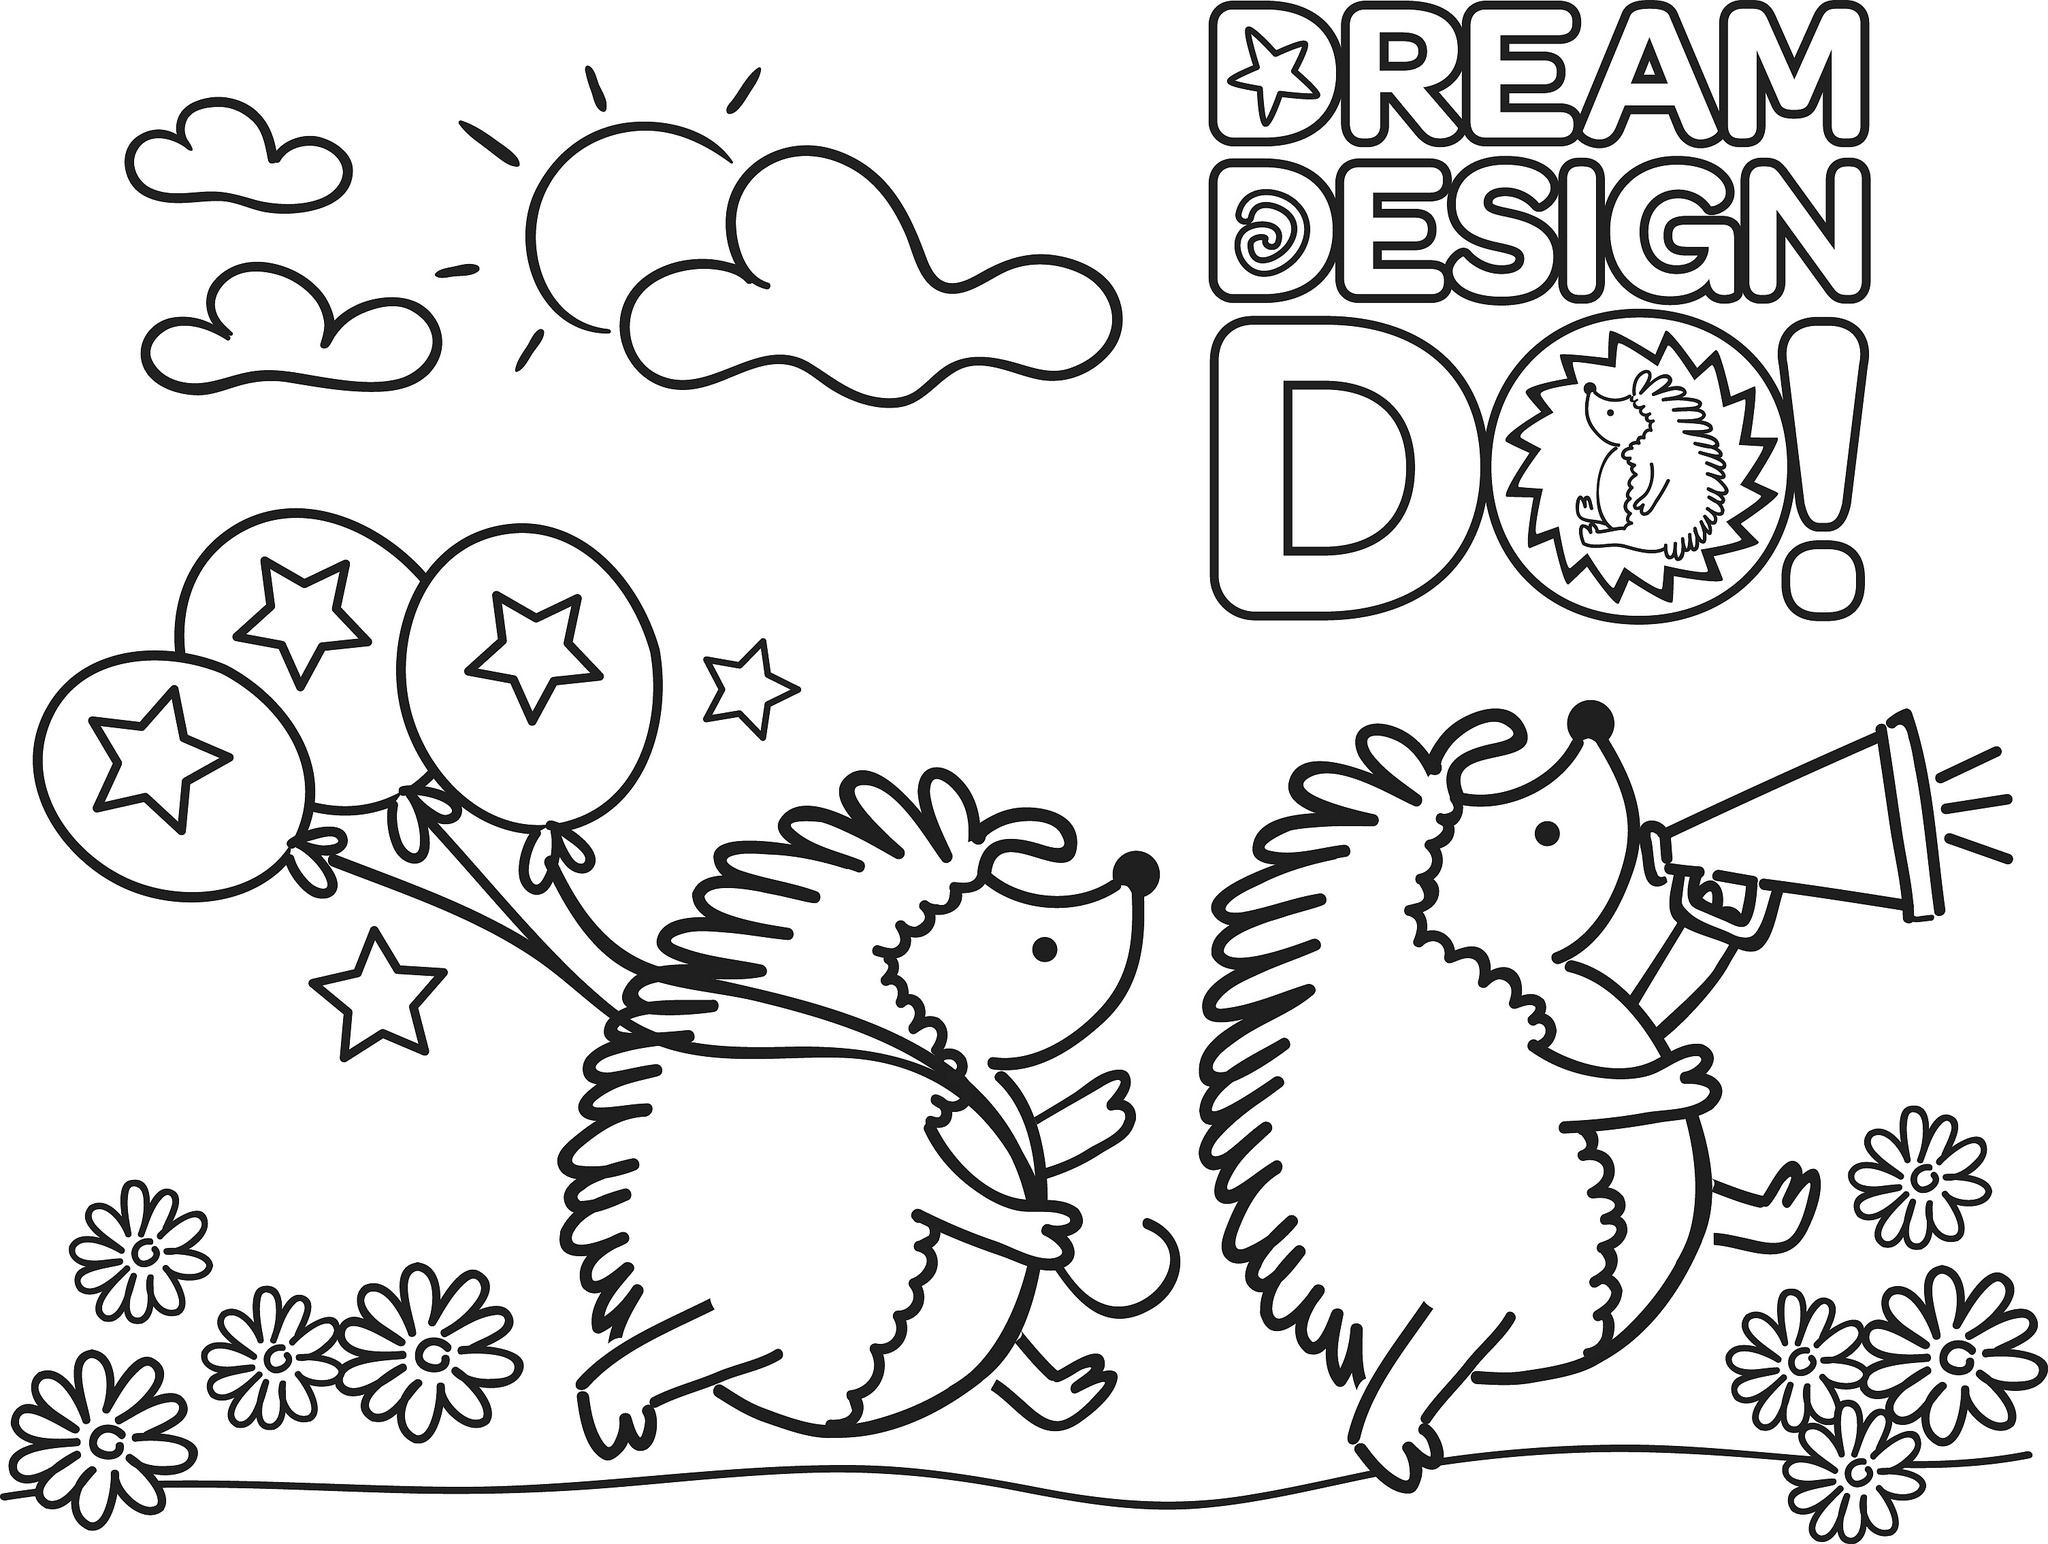 Girls Scout Cookie Coloring Pages
 ABC Baker cookie coloring sheet